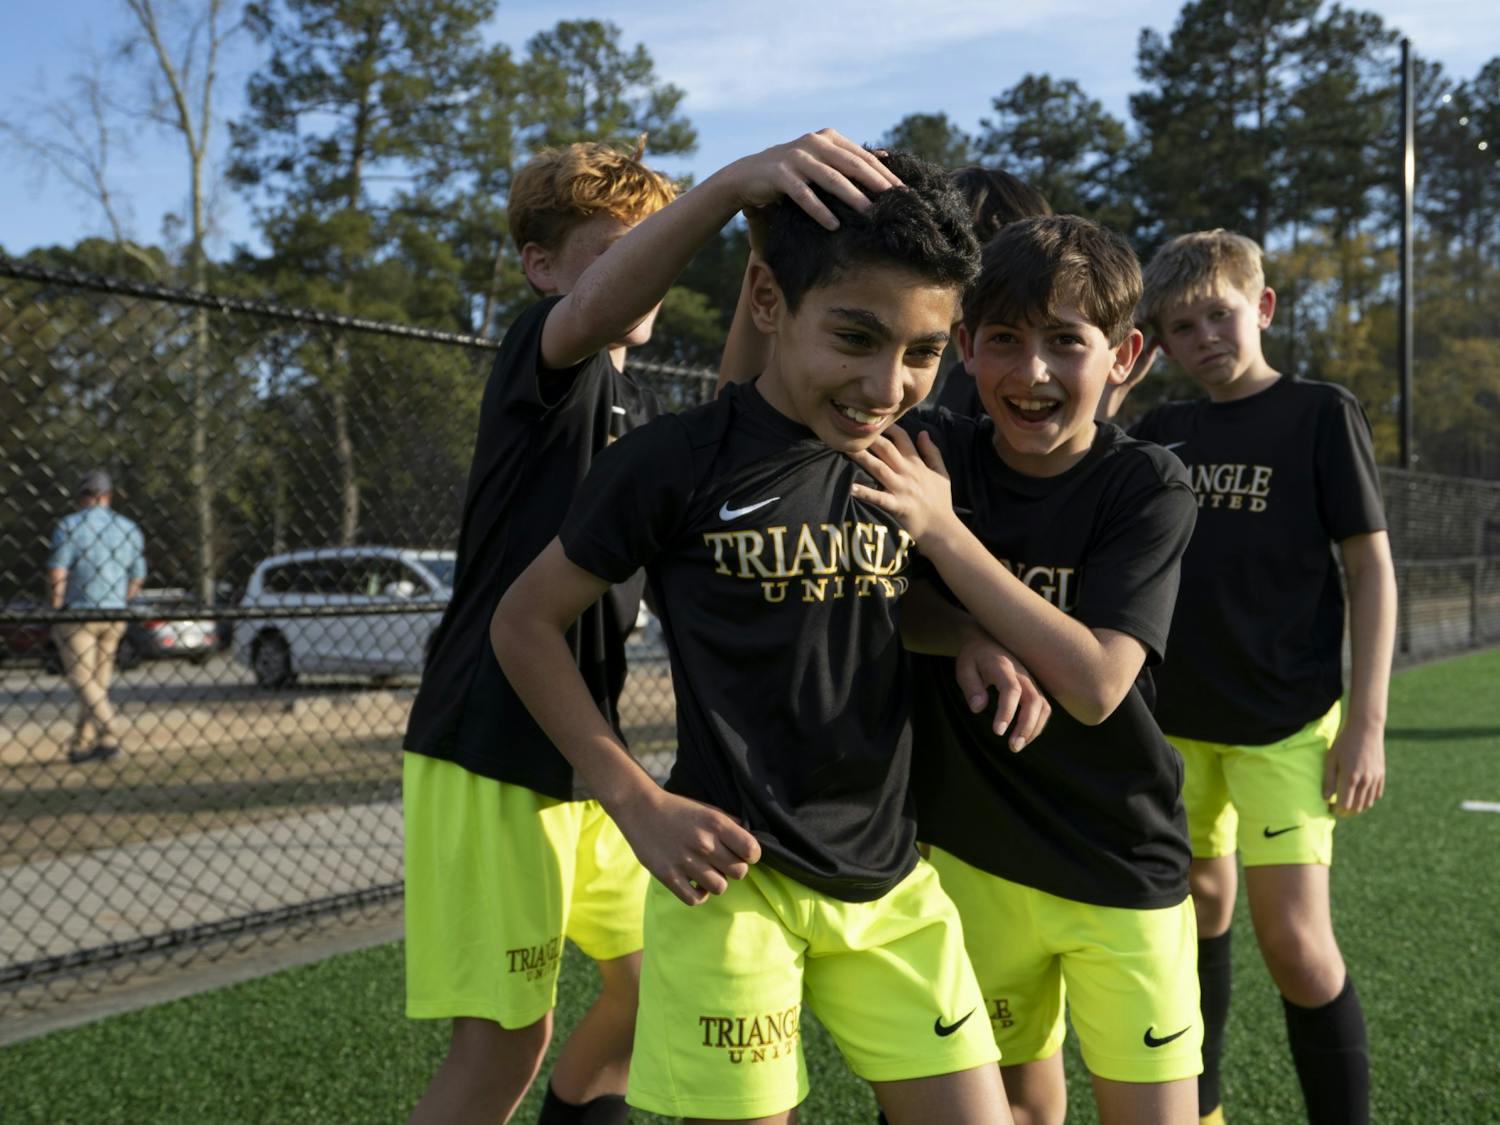 Players with Triangle United Soccer Association celebrate together after making an inaugural goal on their new turf. The Town of Chapel Hill held a ribbon cutting ceremony on Thursday, Mar. 23, 2023, at Cedar Falls Park in Chapel Hill, N.C. to celebrate the freshly-redone, environmentally-friendly turf for the multi-purpose field.